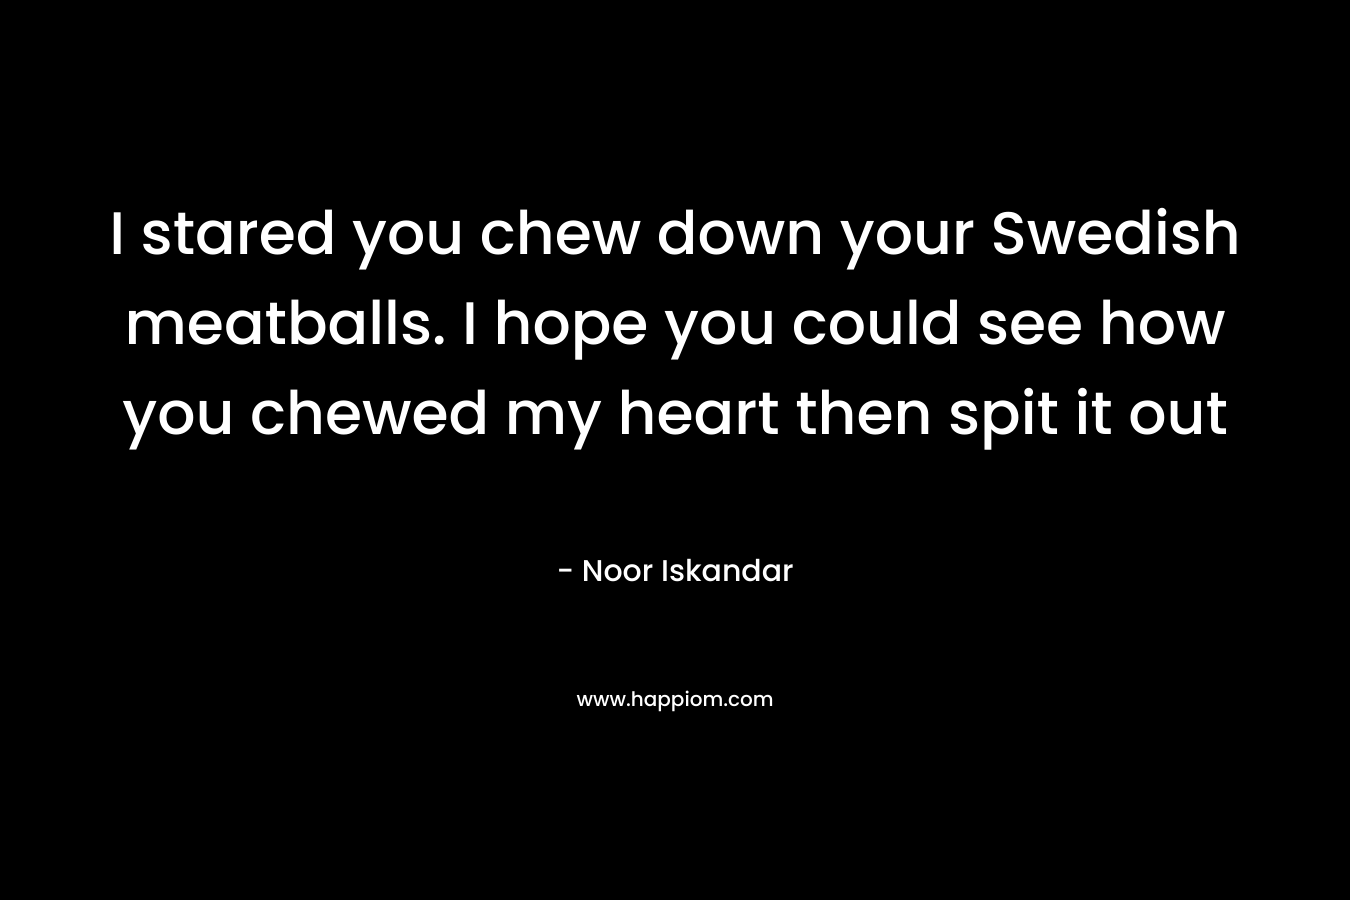 I stared you chew down your Swedish meatballs. I hope you could see how you chewed my heart then spit it out – Noor Iskandar